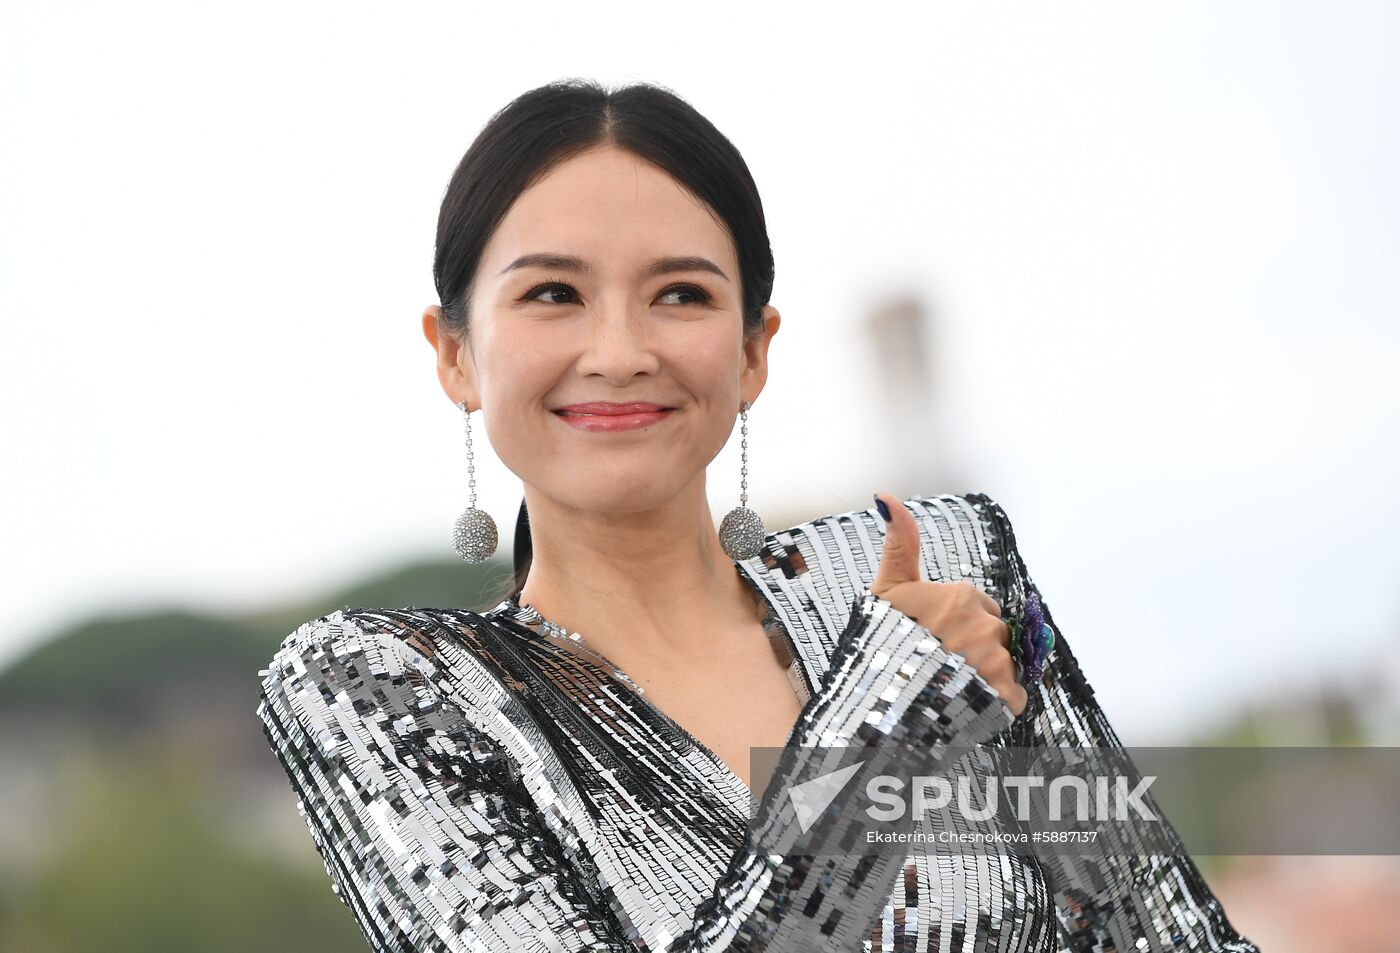 France Cannes Film Festival Rendez Vous With Zhang Ziyi